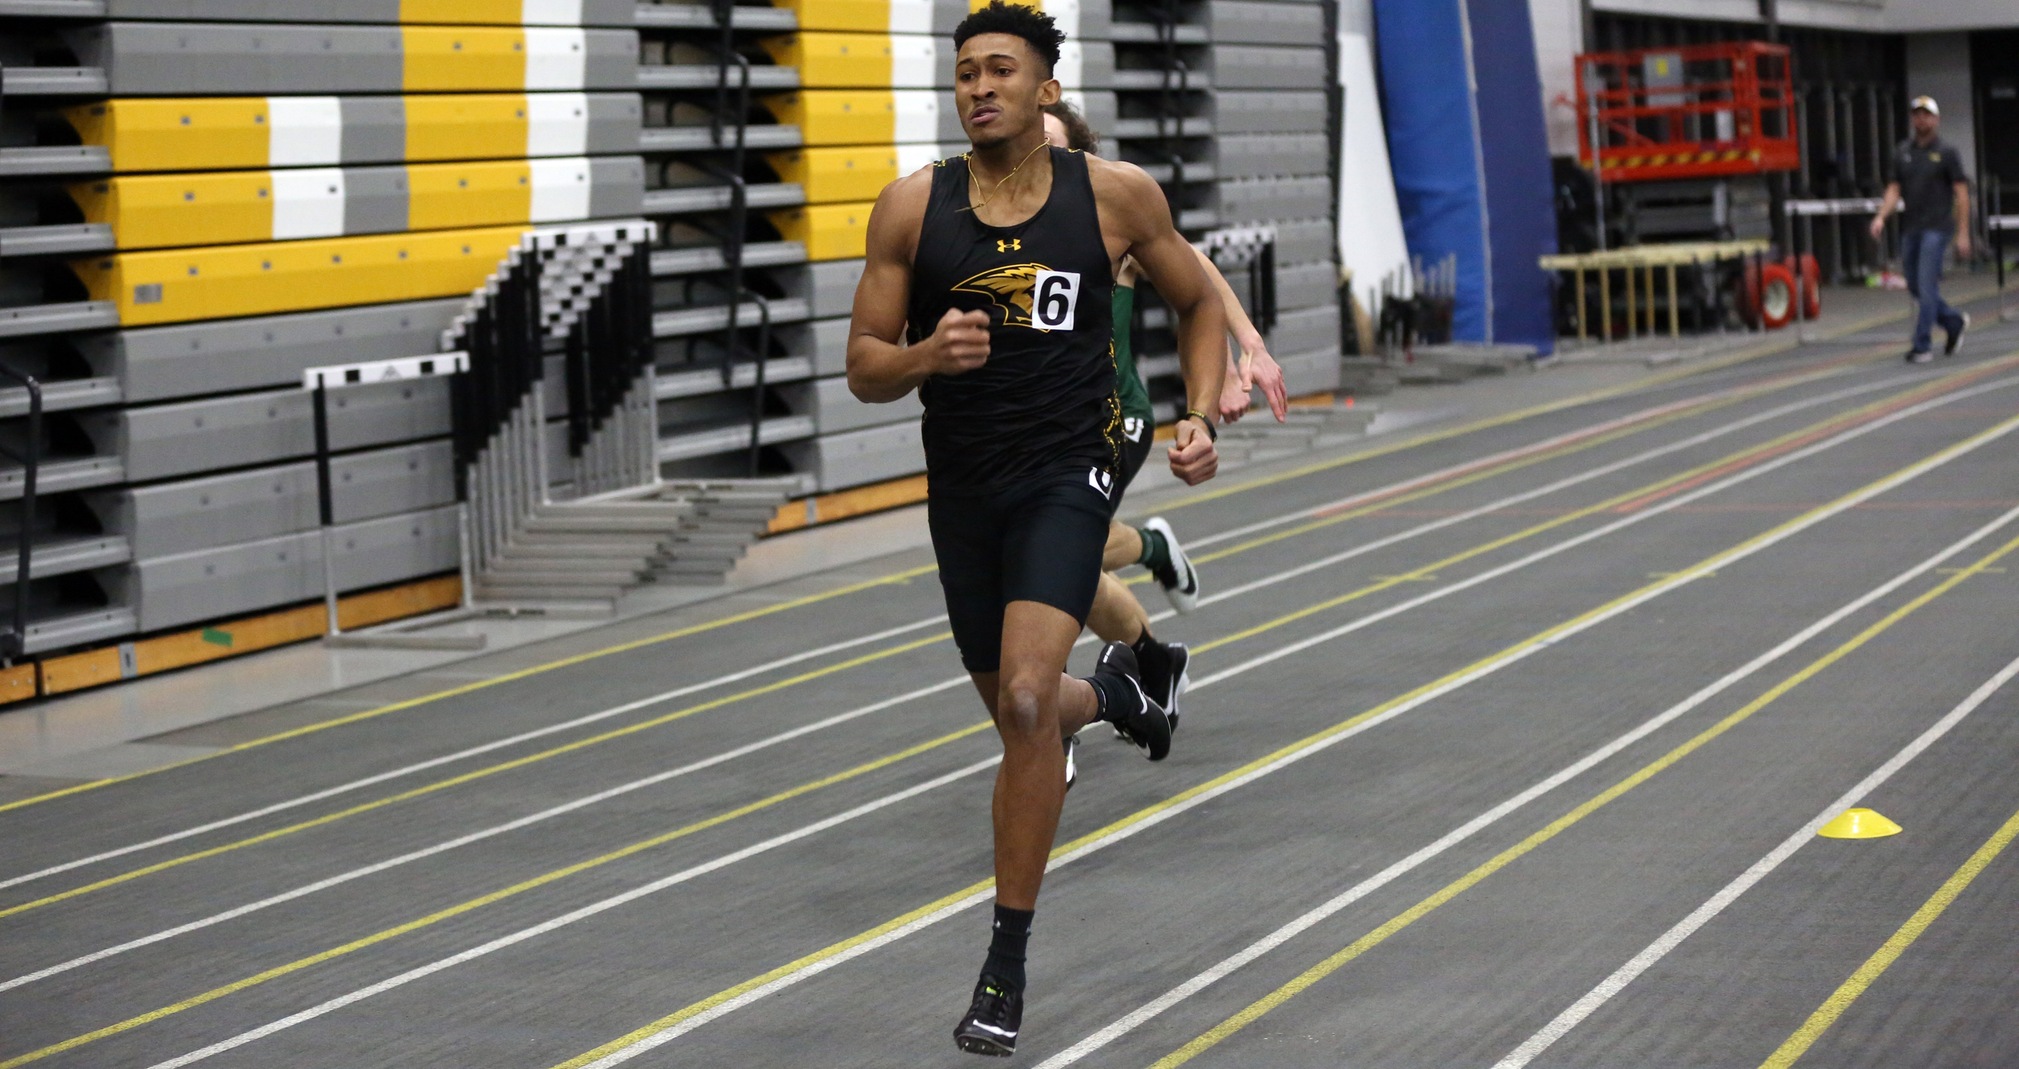 Todd Beadle won the 400-meter run and helped the Titans' 1,600-meter relay team capture first place at the UW-Whitewater "Squig" Converse Invitational.